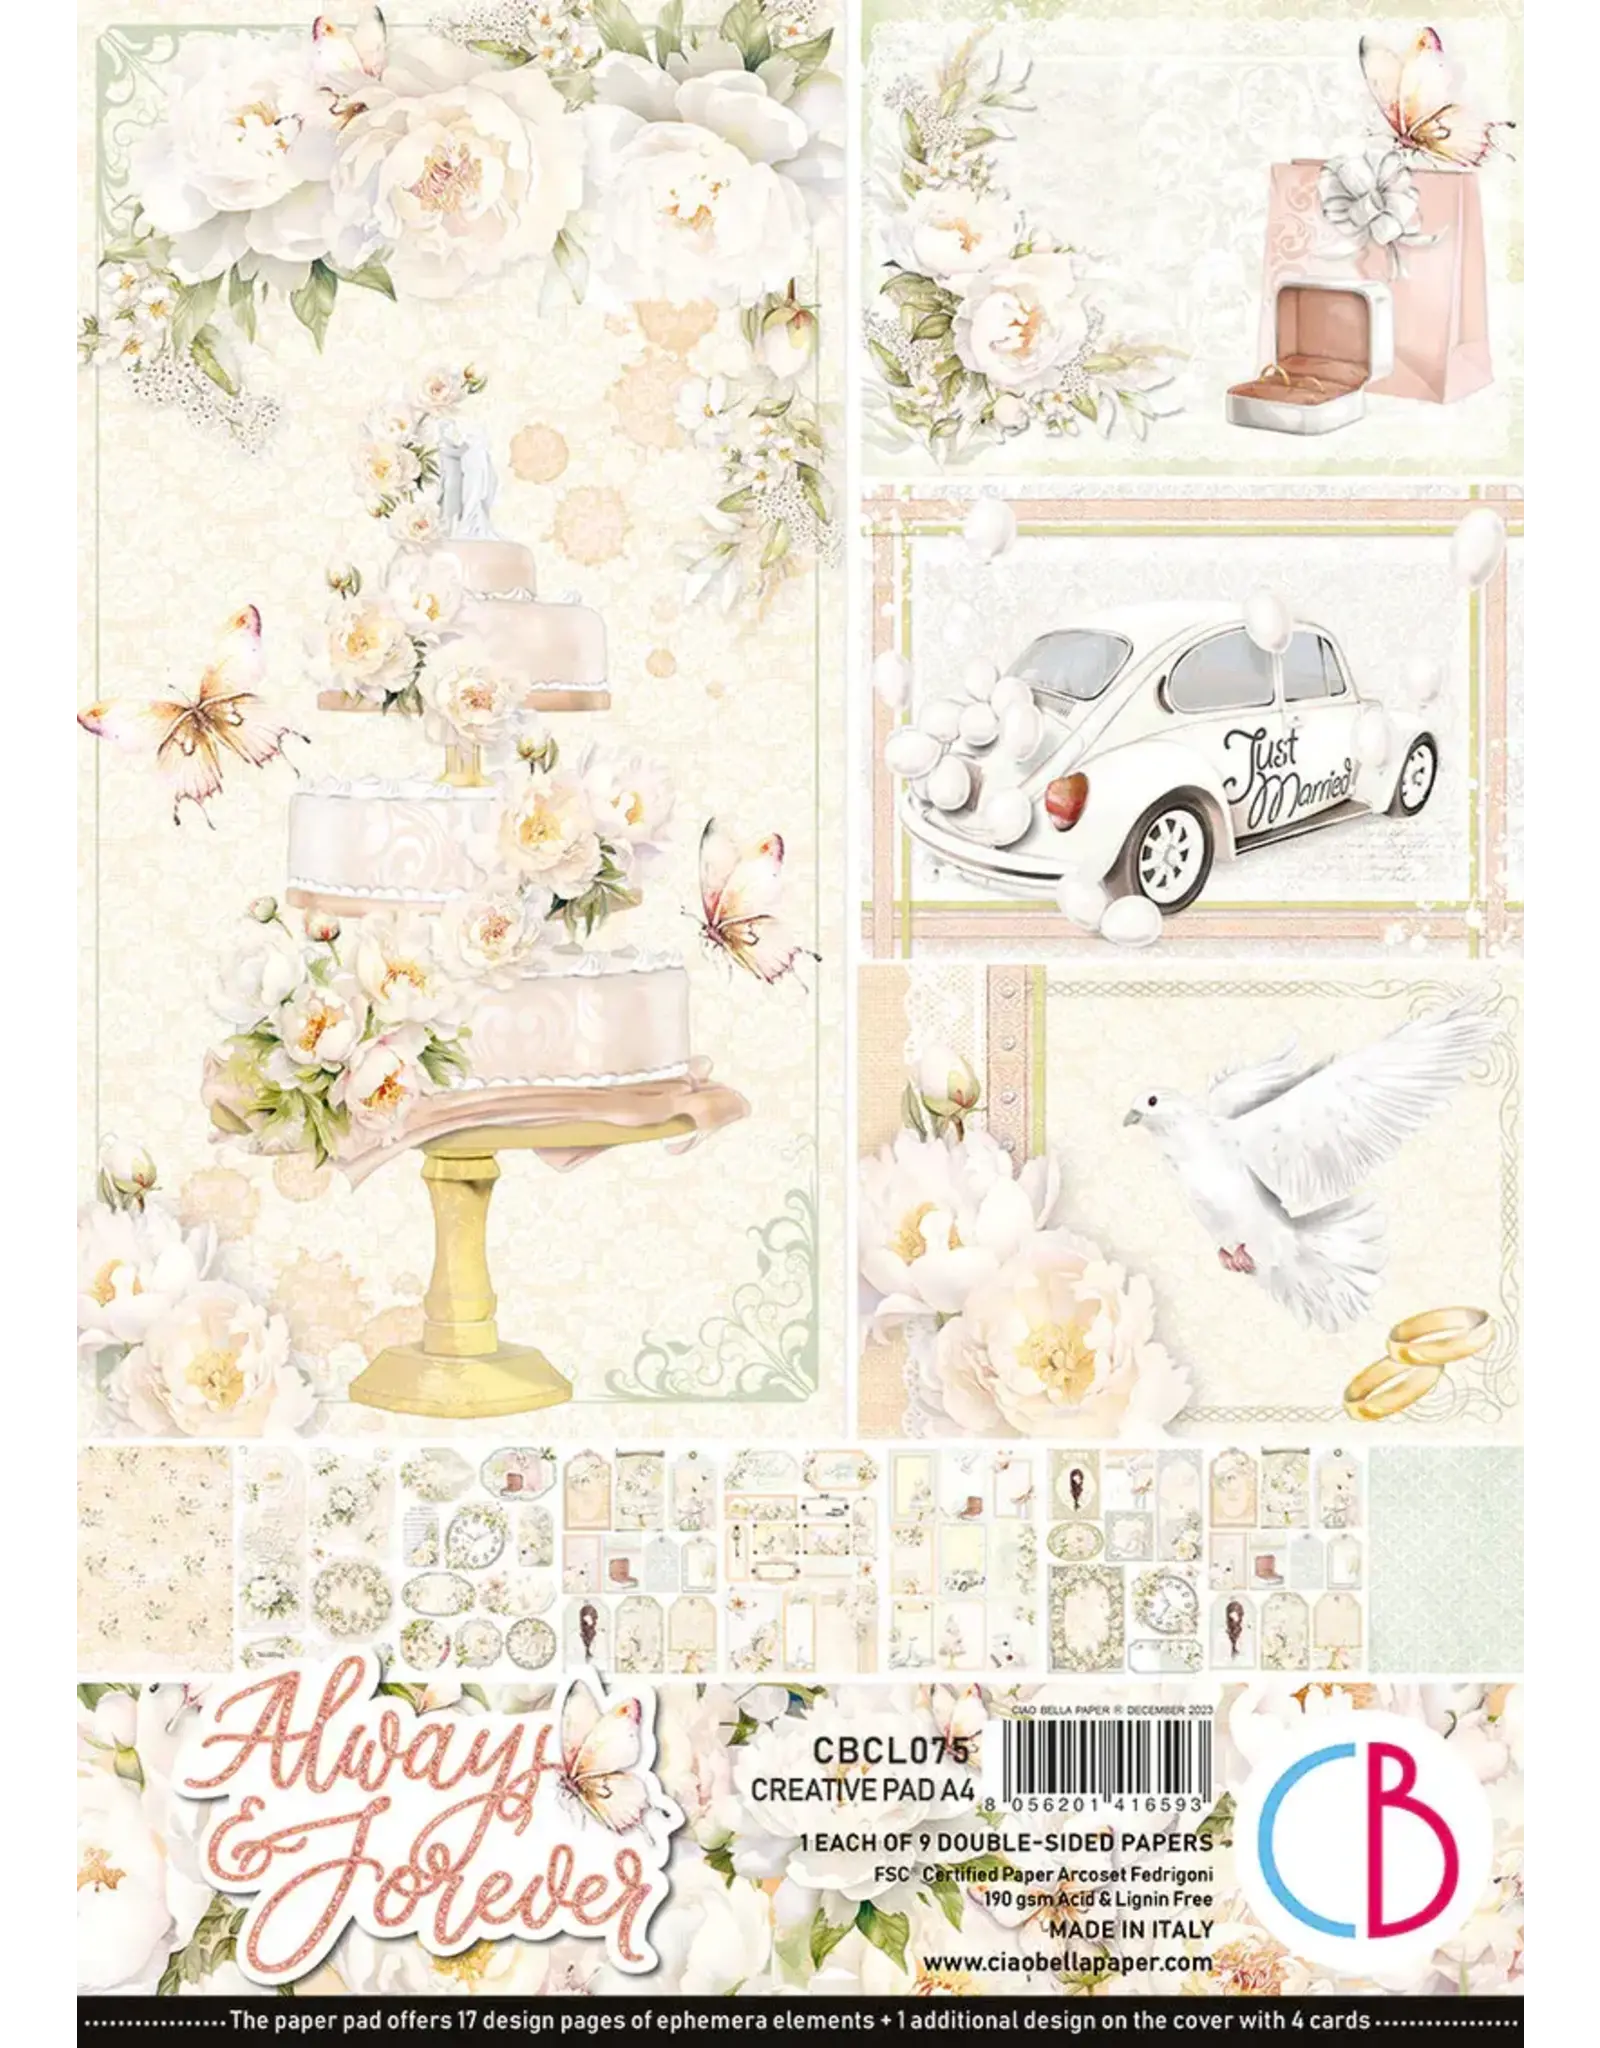 CIAO BELLA CIAO BELLA ALWAYS & FOREVER A4 CREATIVE PAD 9 SHEETS